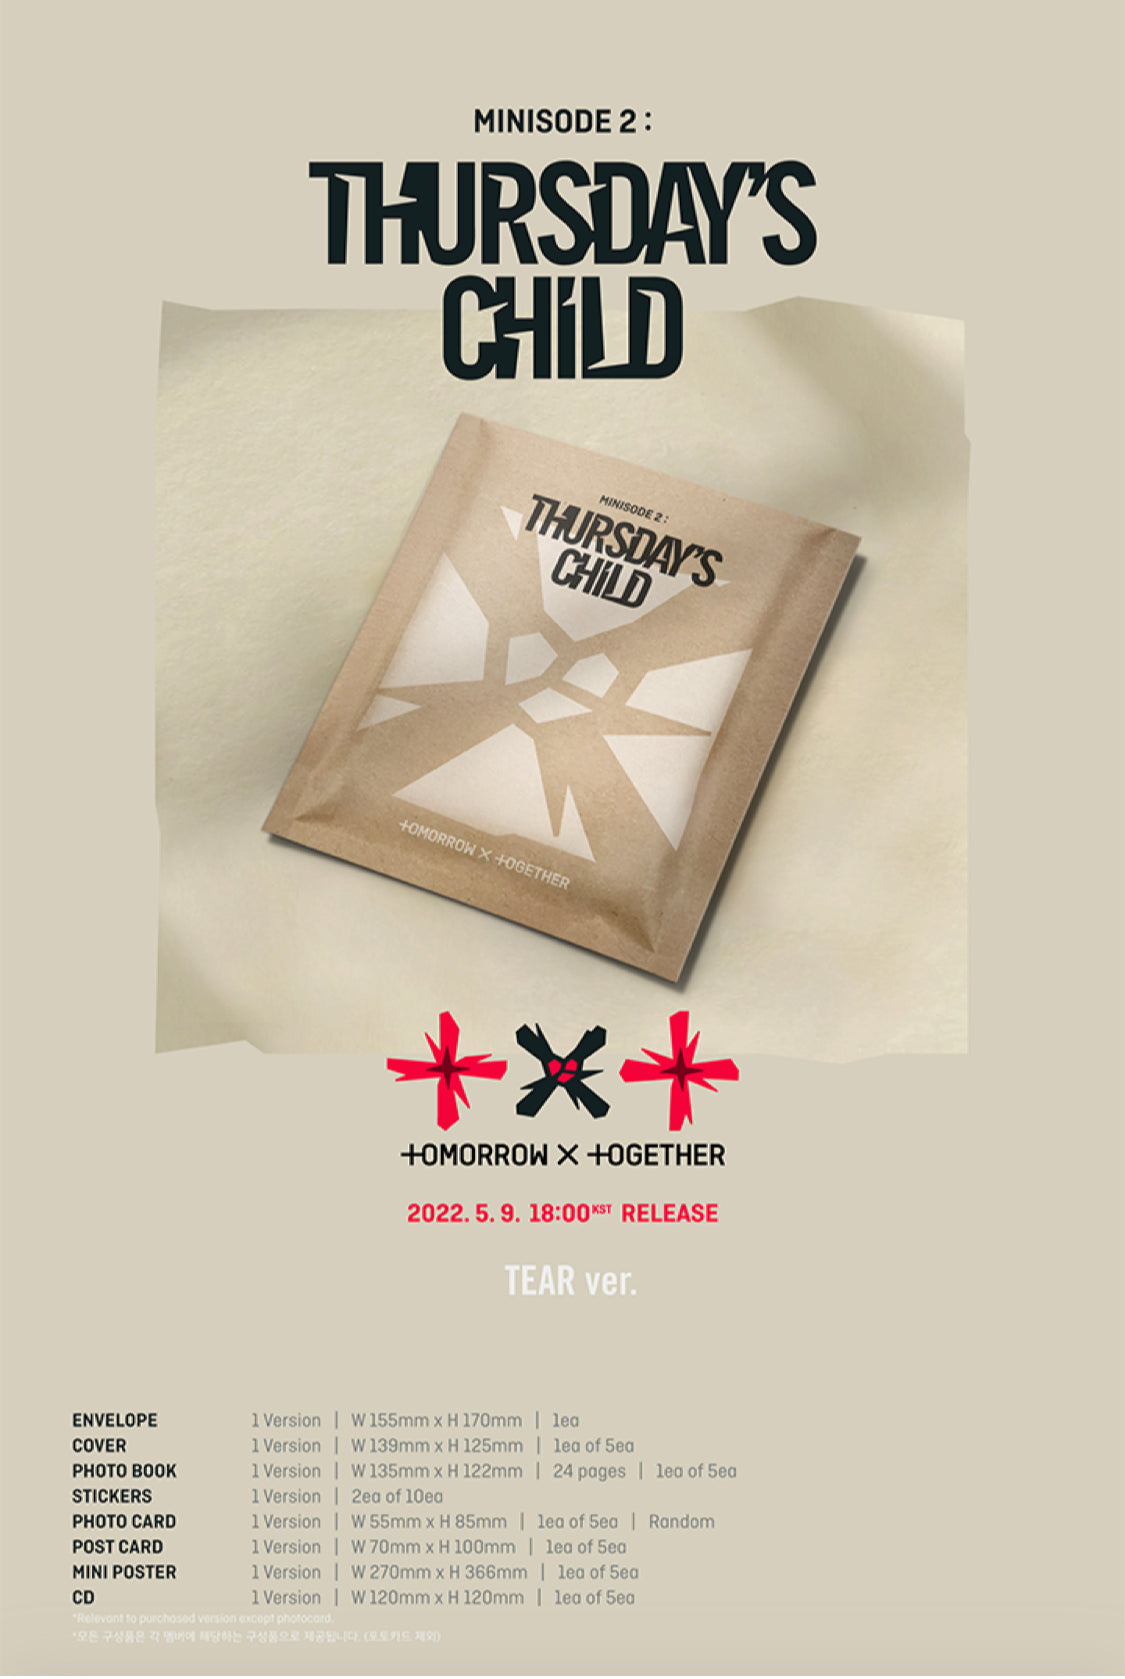 TOMORROW X TOGETHER Minisode 2: THURSDAY'S CHILD Album (TEAR ver.) [Official] - TXT Universe